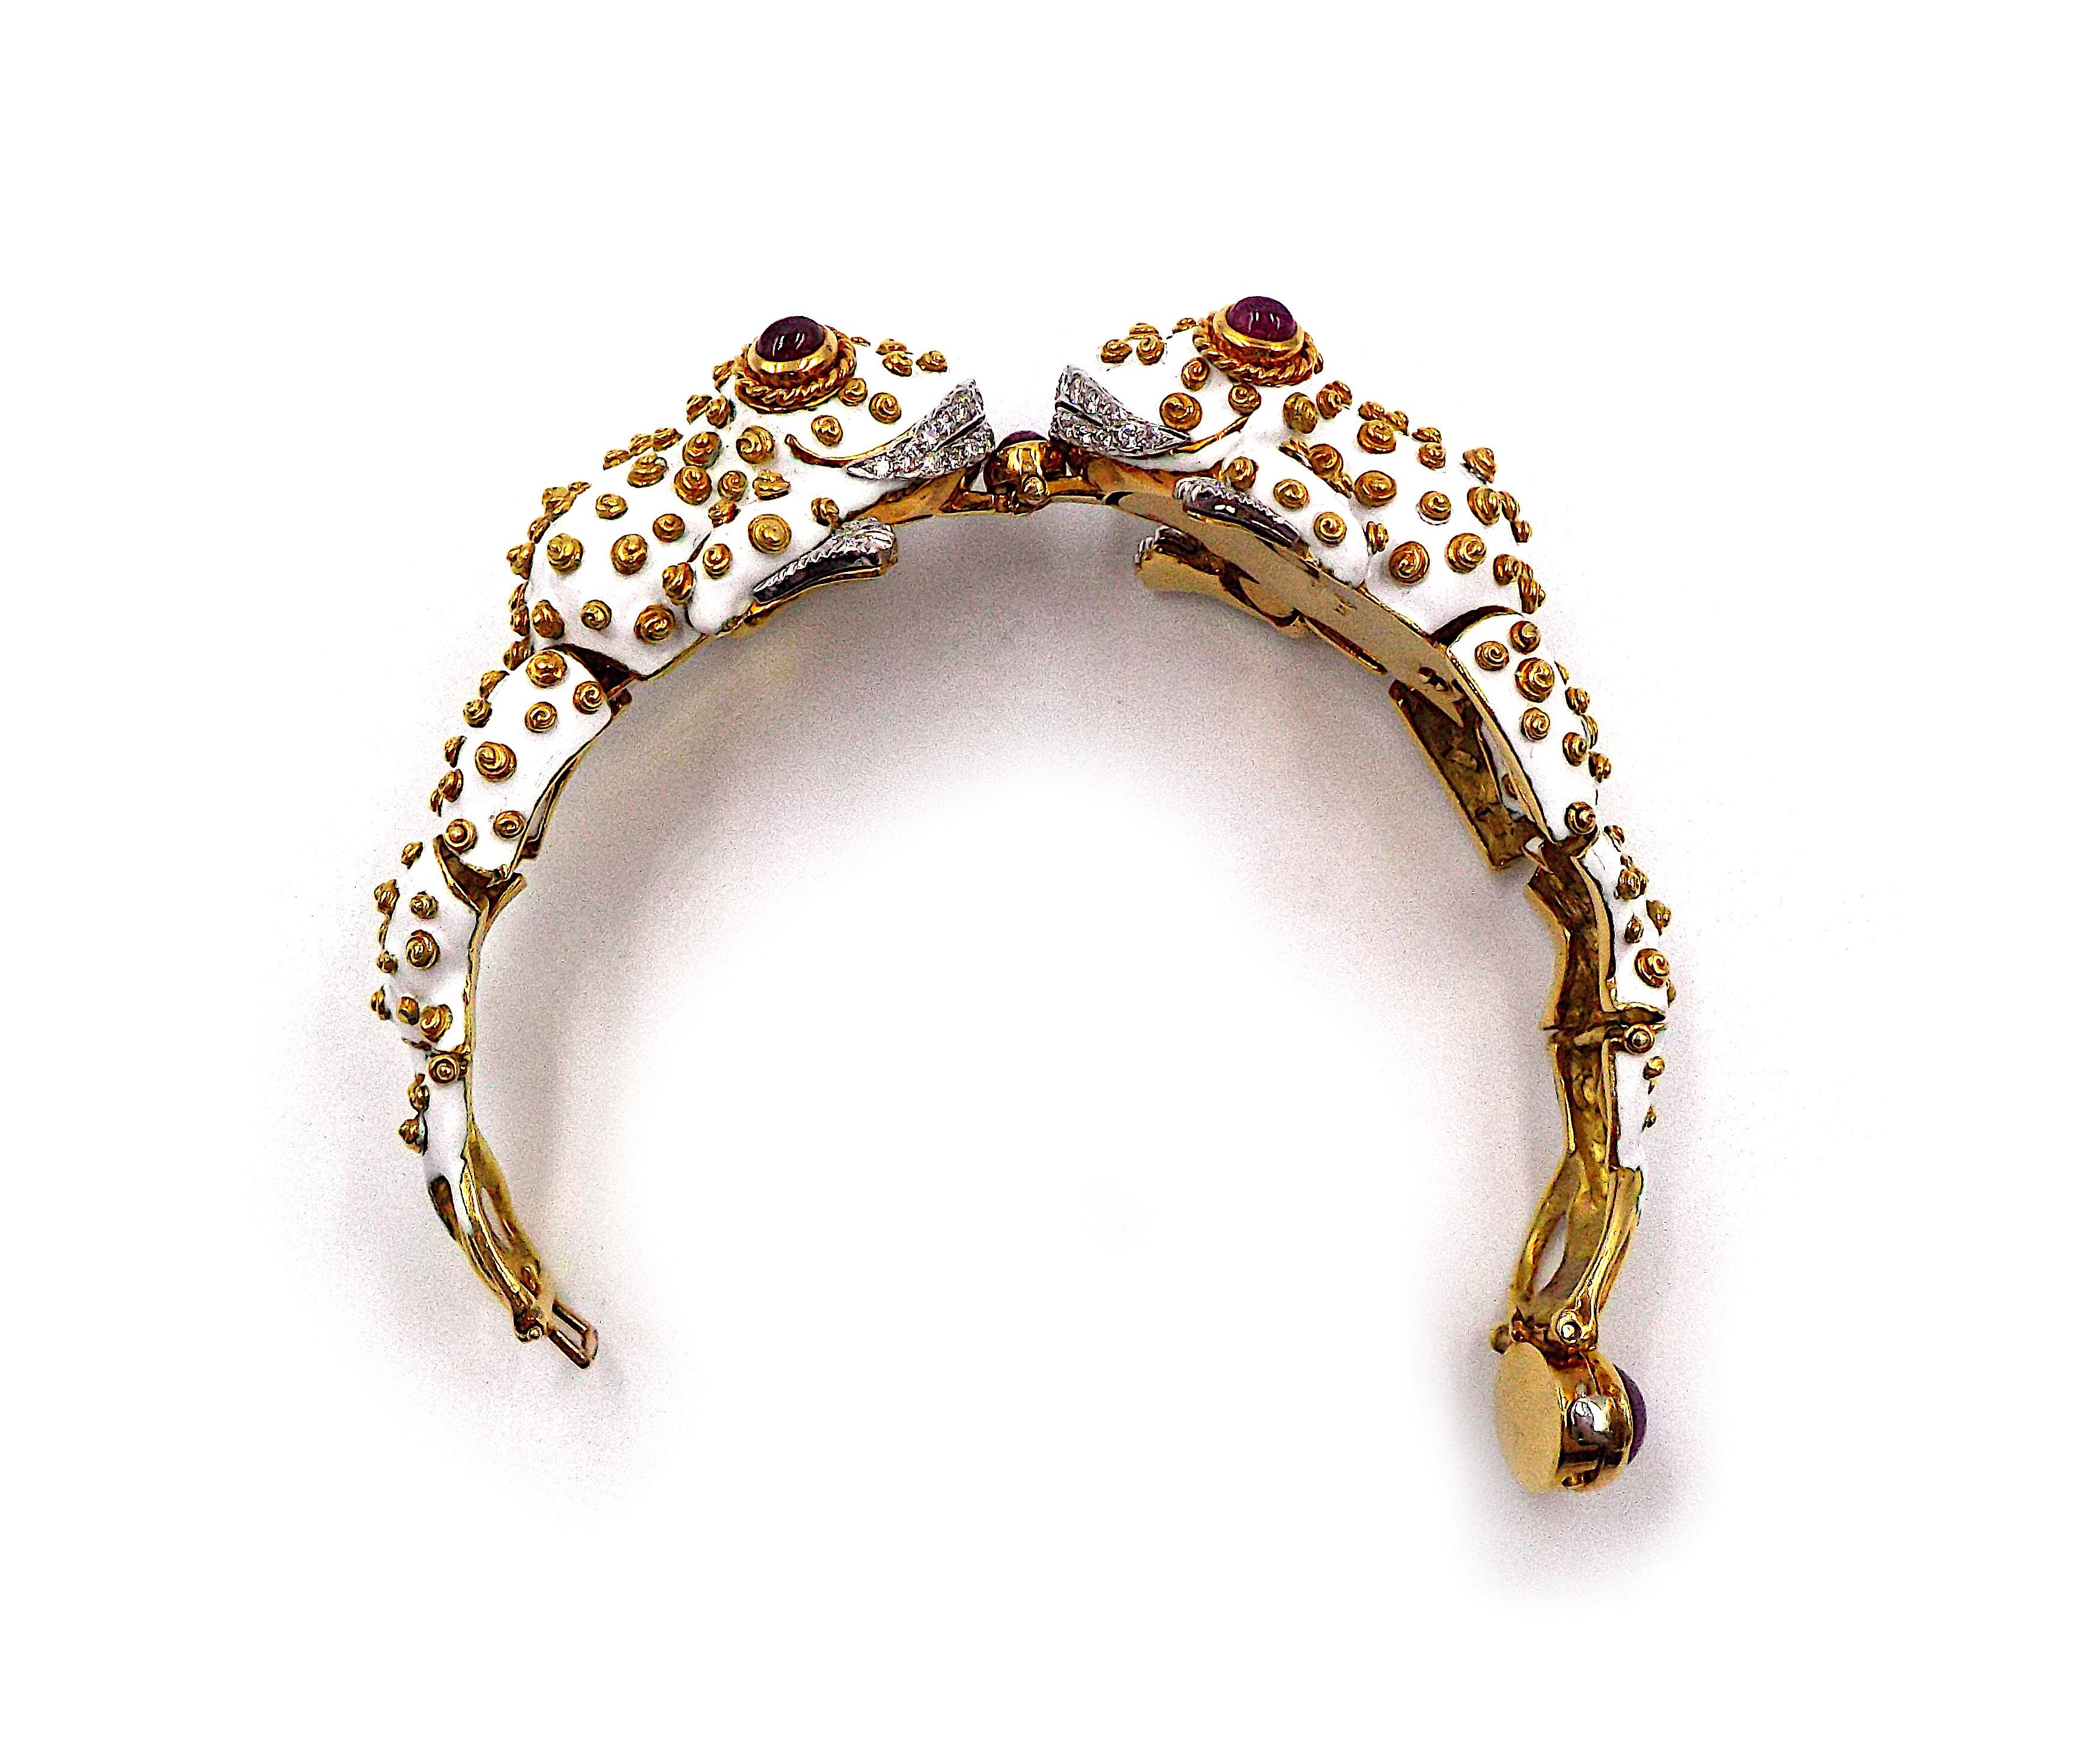 A fancy twin frog shaped bracelet by David Webb. Cabochon rubies, brilliant-cut diamonds, white enamel, 18K gold, and platinum. Gross weight is approximately 113.7g, inner circumference is approximately 6.75 inches. Signed Webb, marked 18K, Plat.